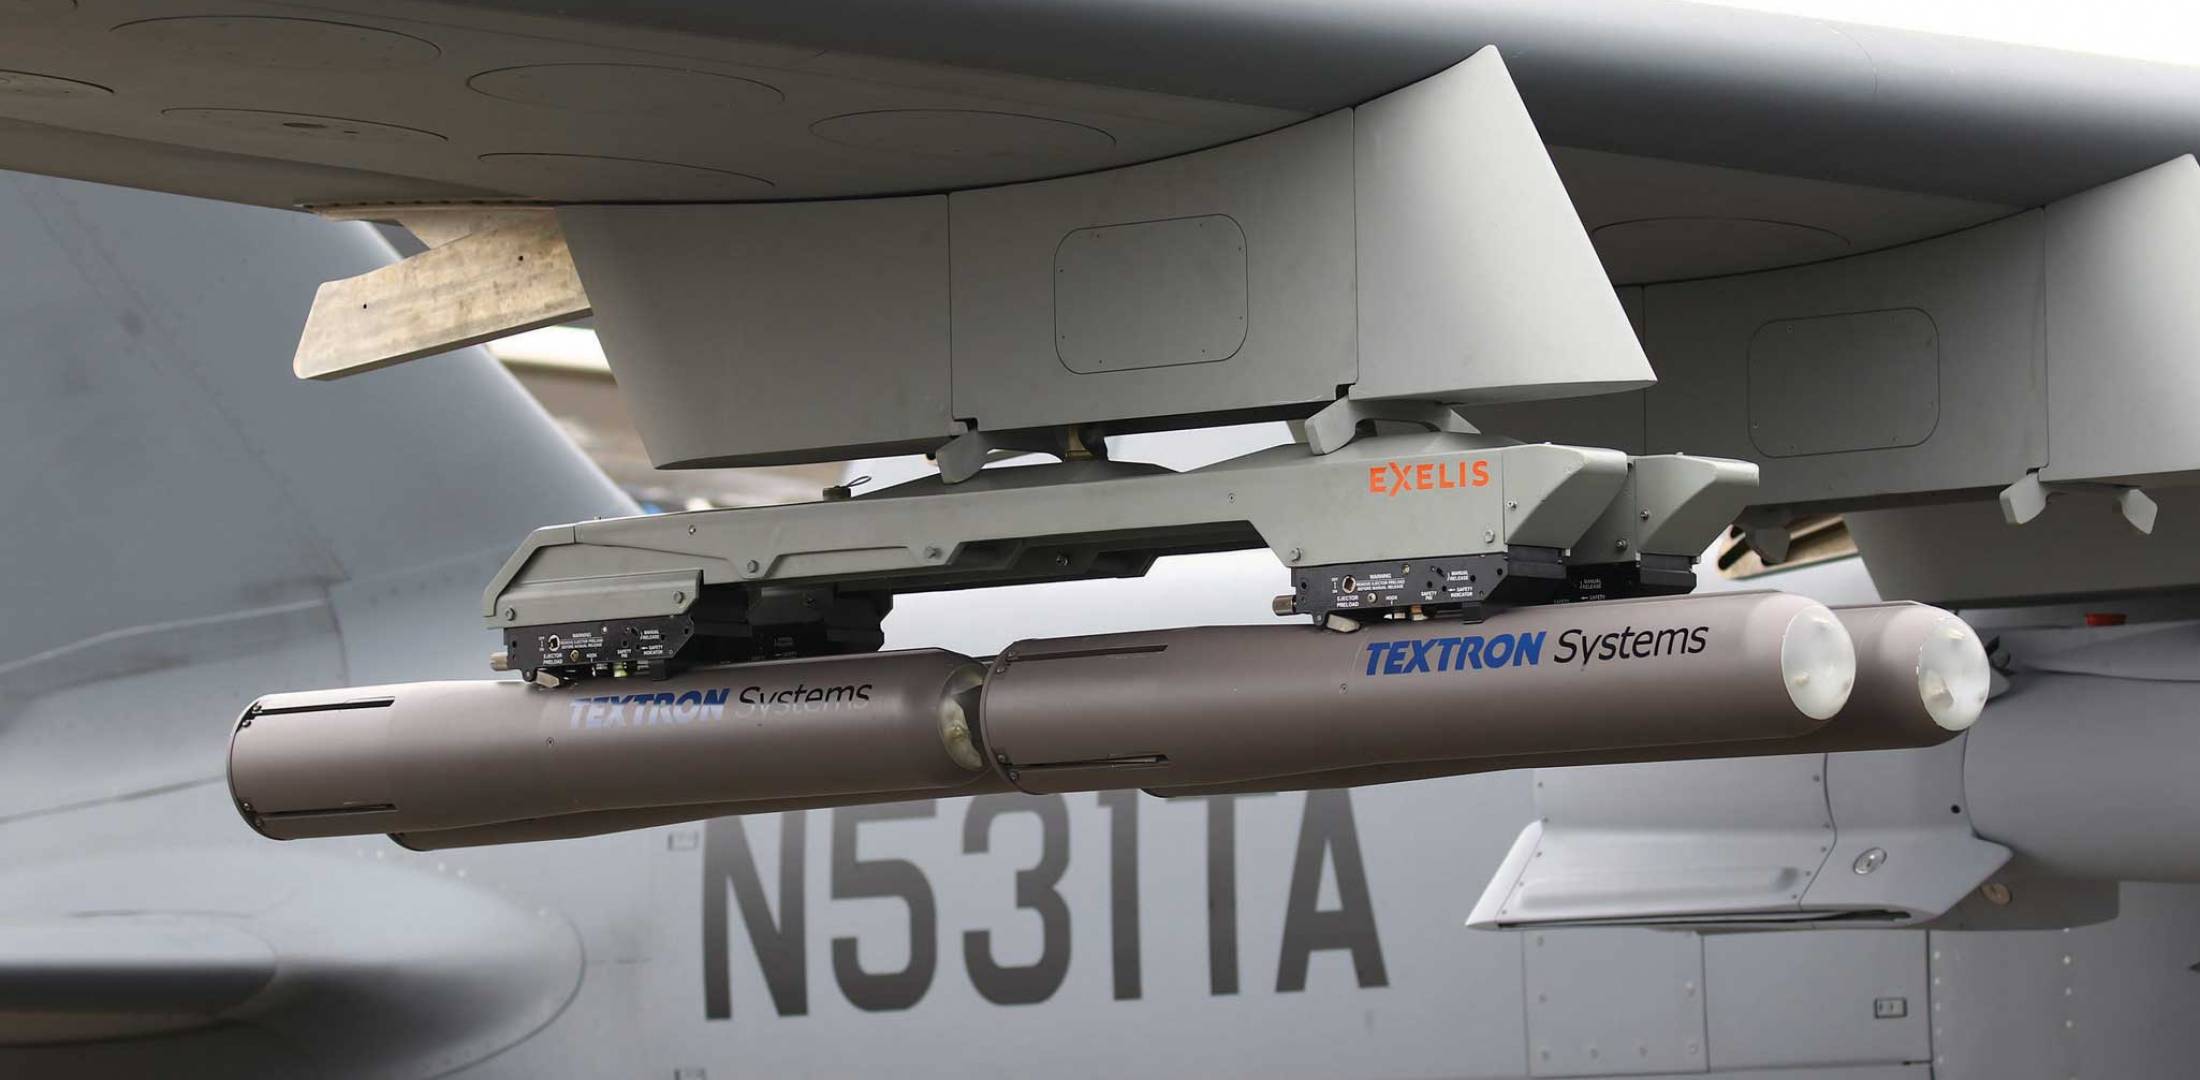 13-facts-about-textron